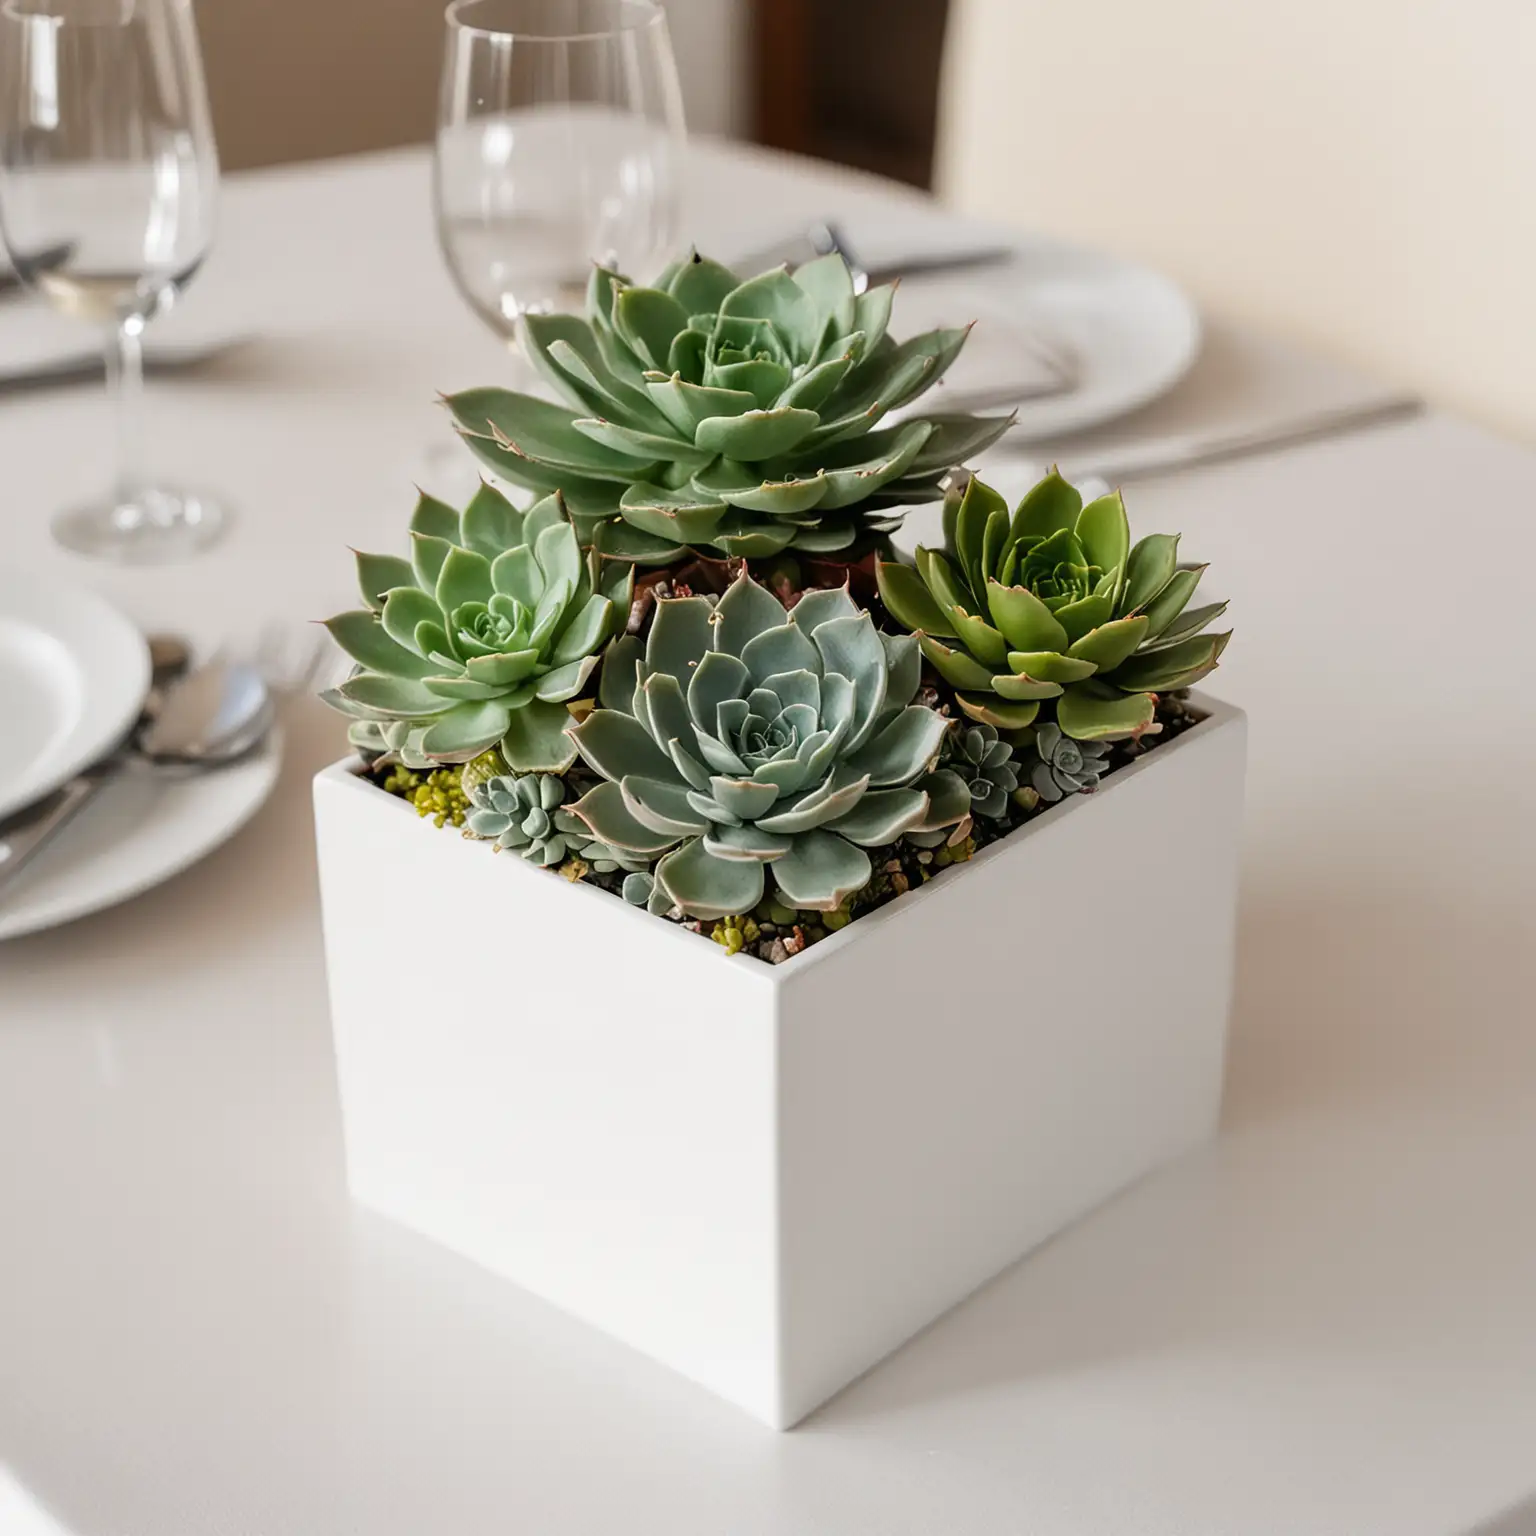 a wedding centerpiece with a nice quality thick, shiny white metallic square vase with succulents for a striking and modern wedding centerpiece